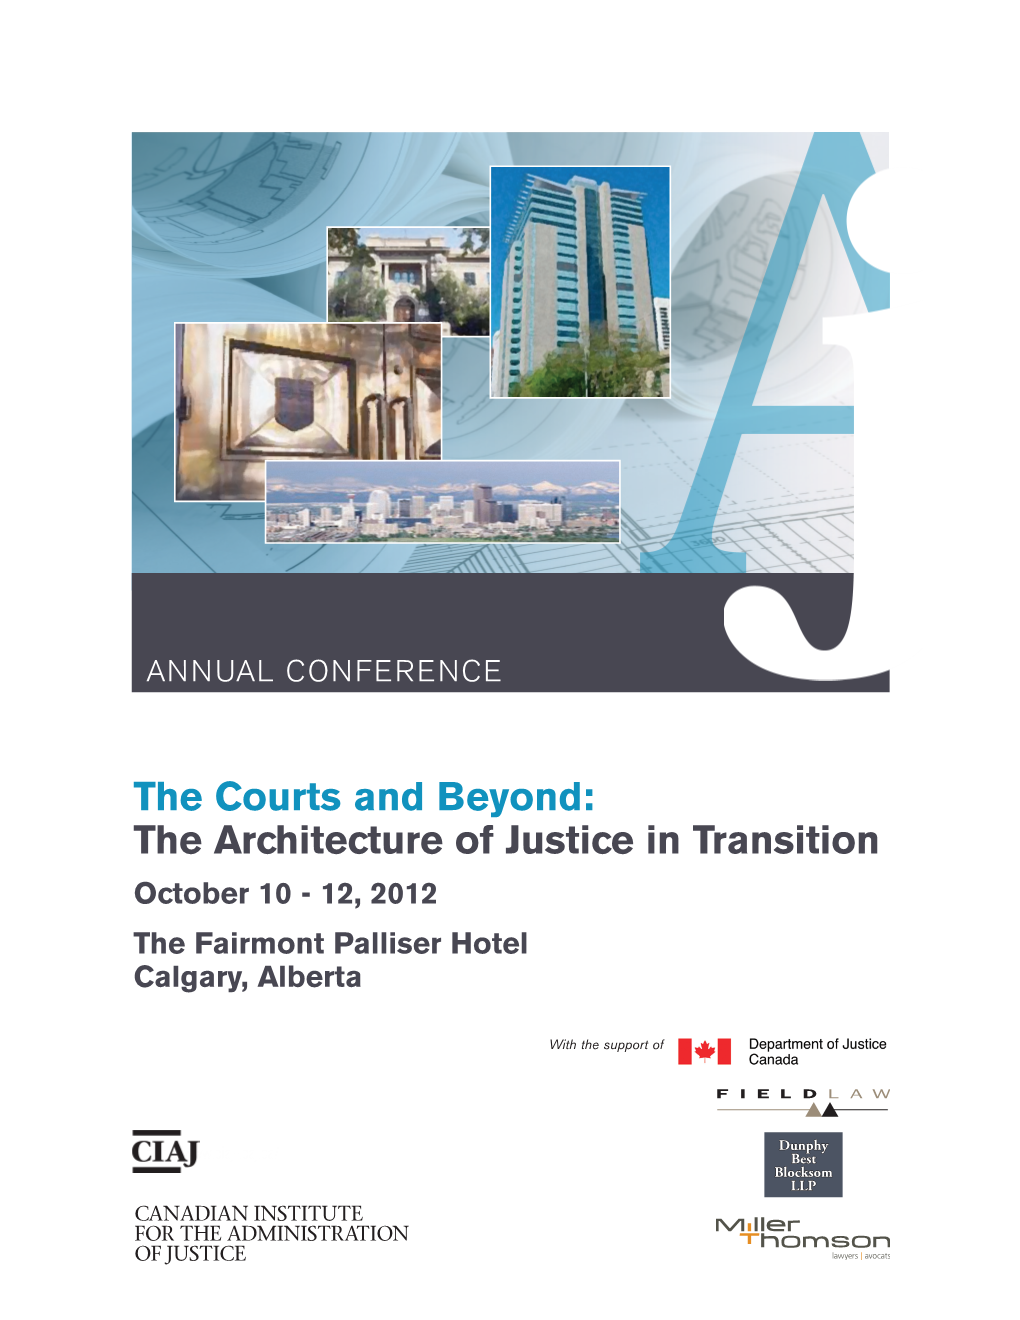 The Courts and Beyond: the Architecture of Justice in Transition October 10 - 12, 2012 the Fairmont Palliser Hotel Calgary, Alberta